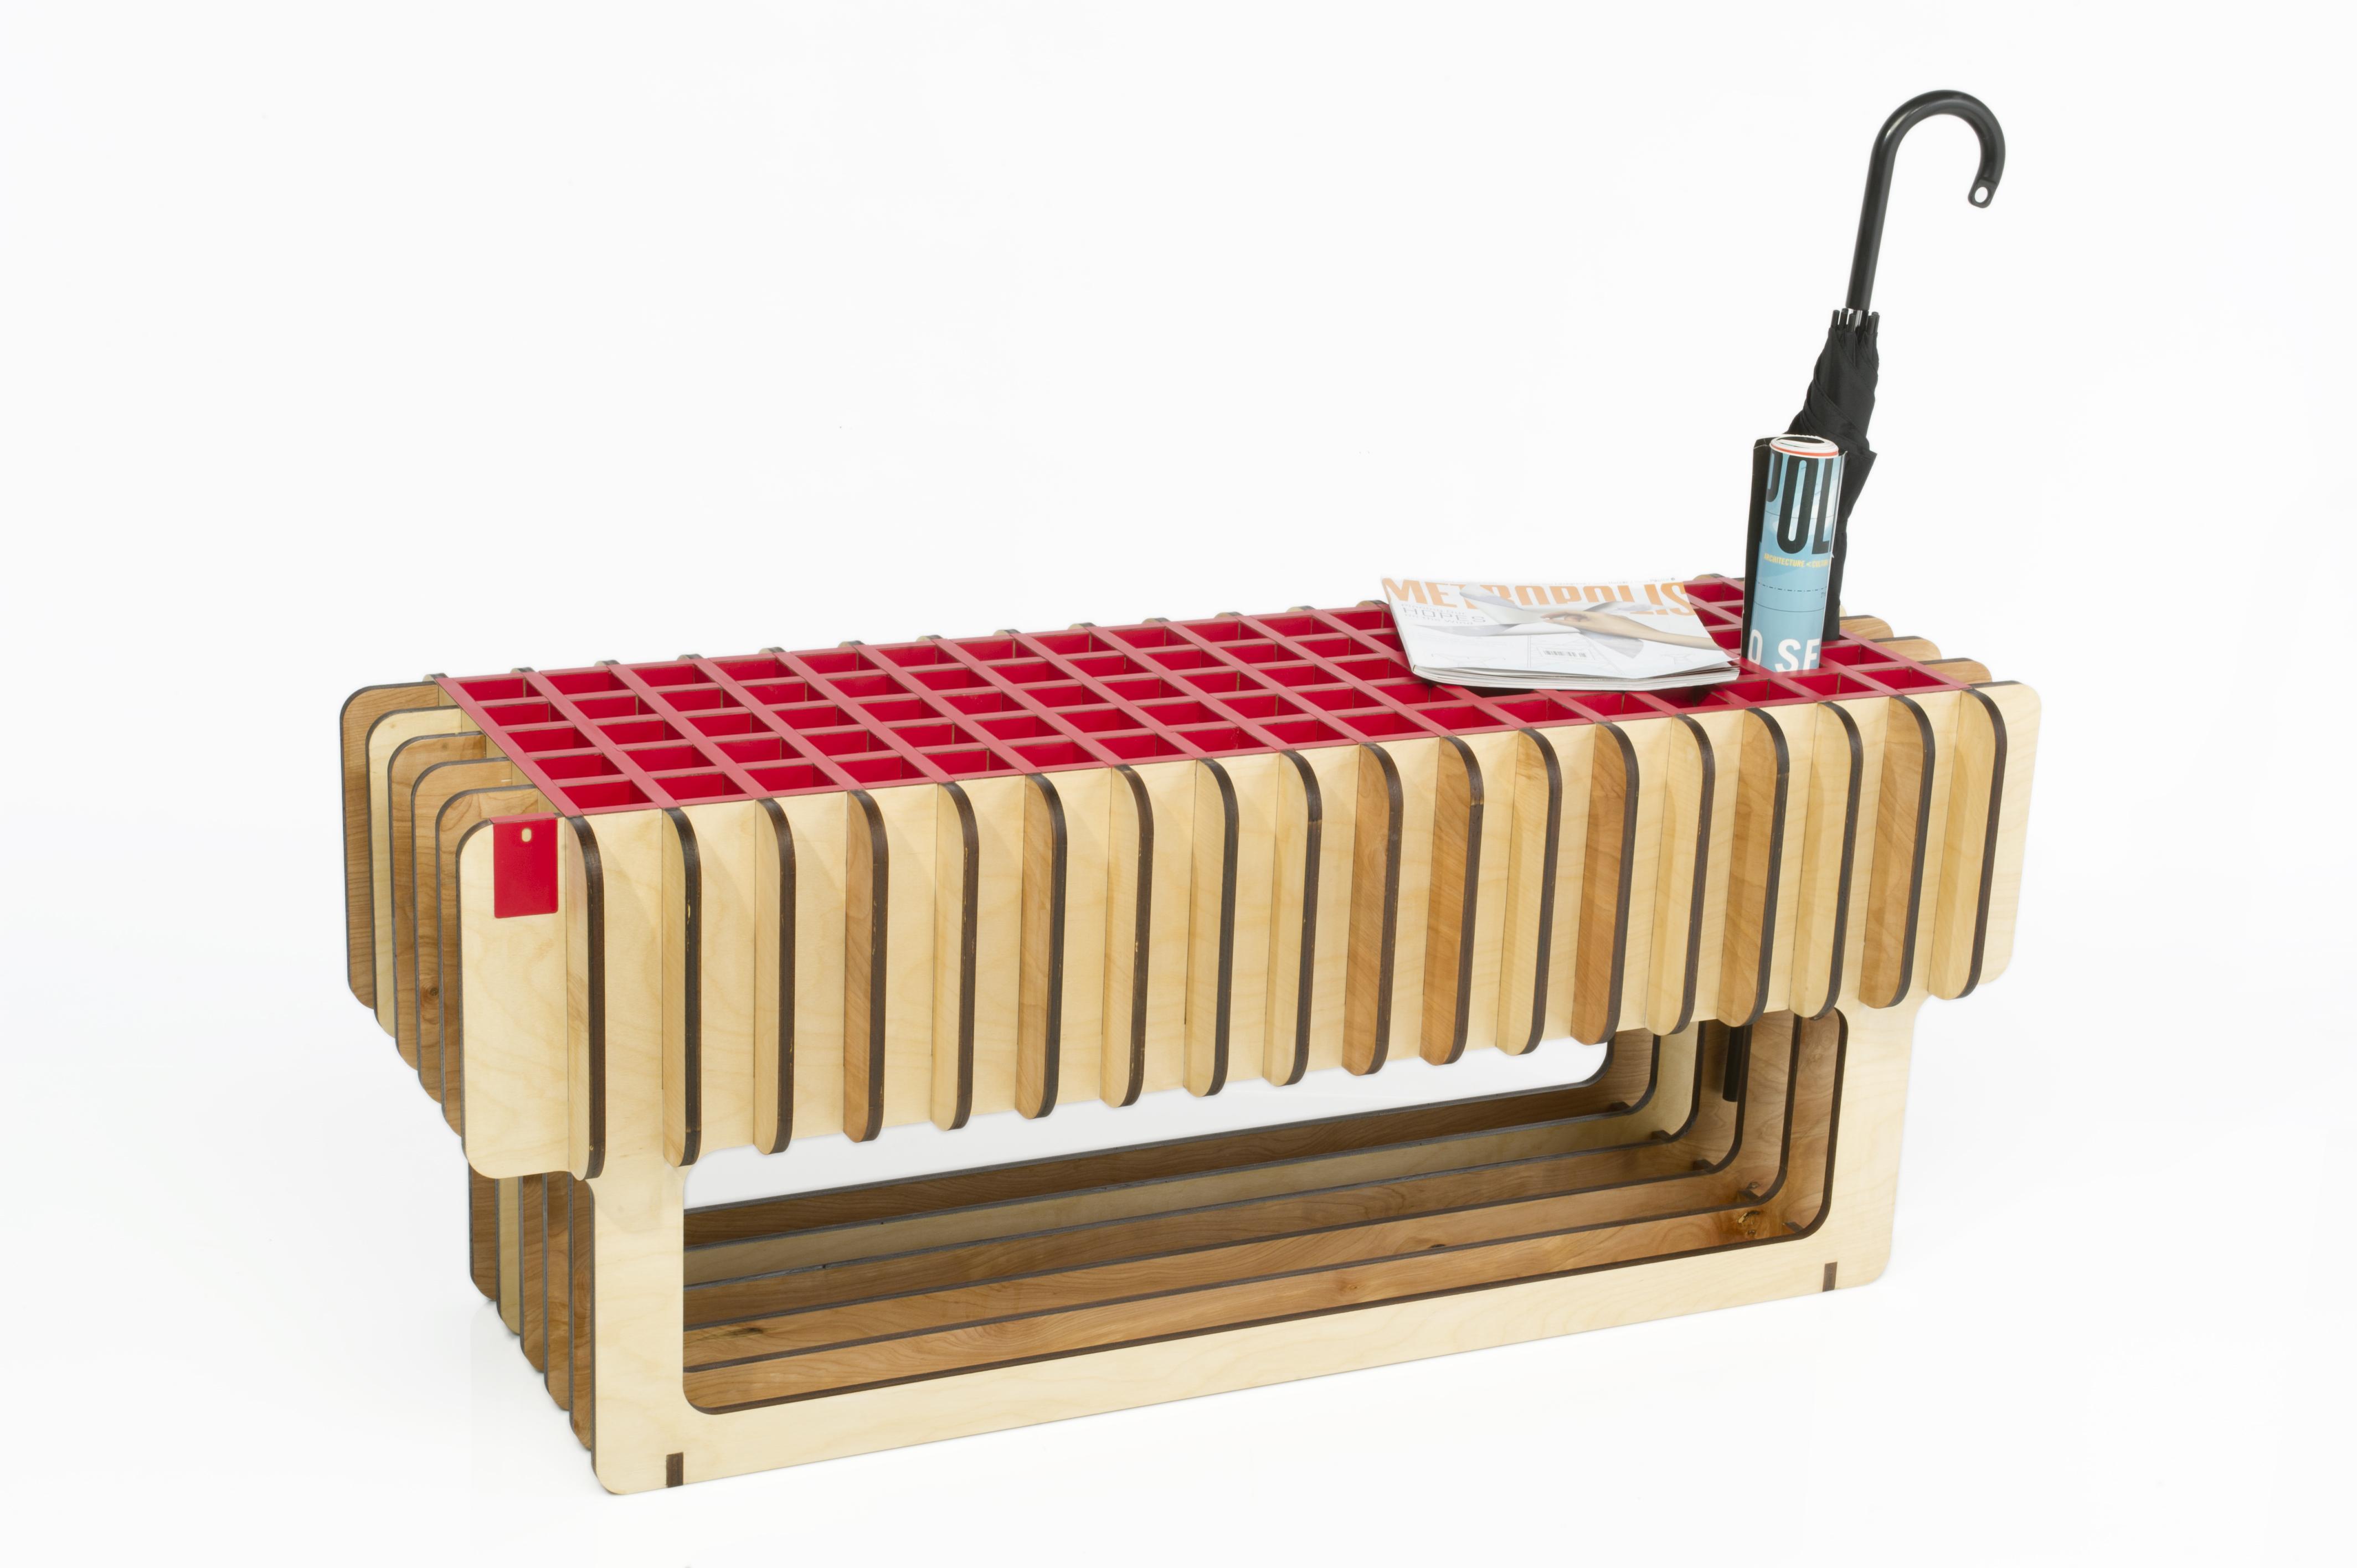 A bench with holes to store items like umbrellas.